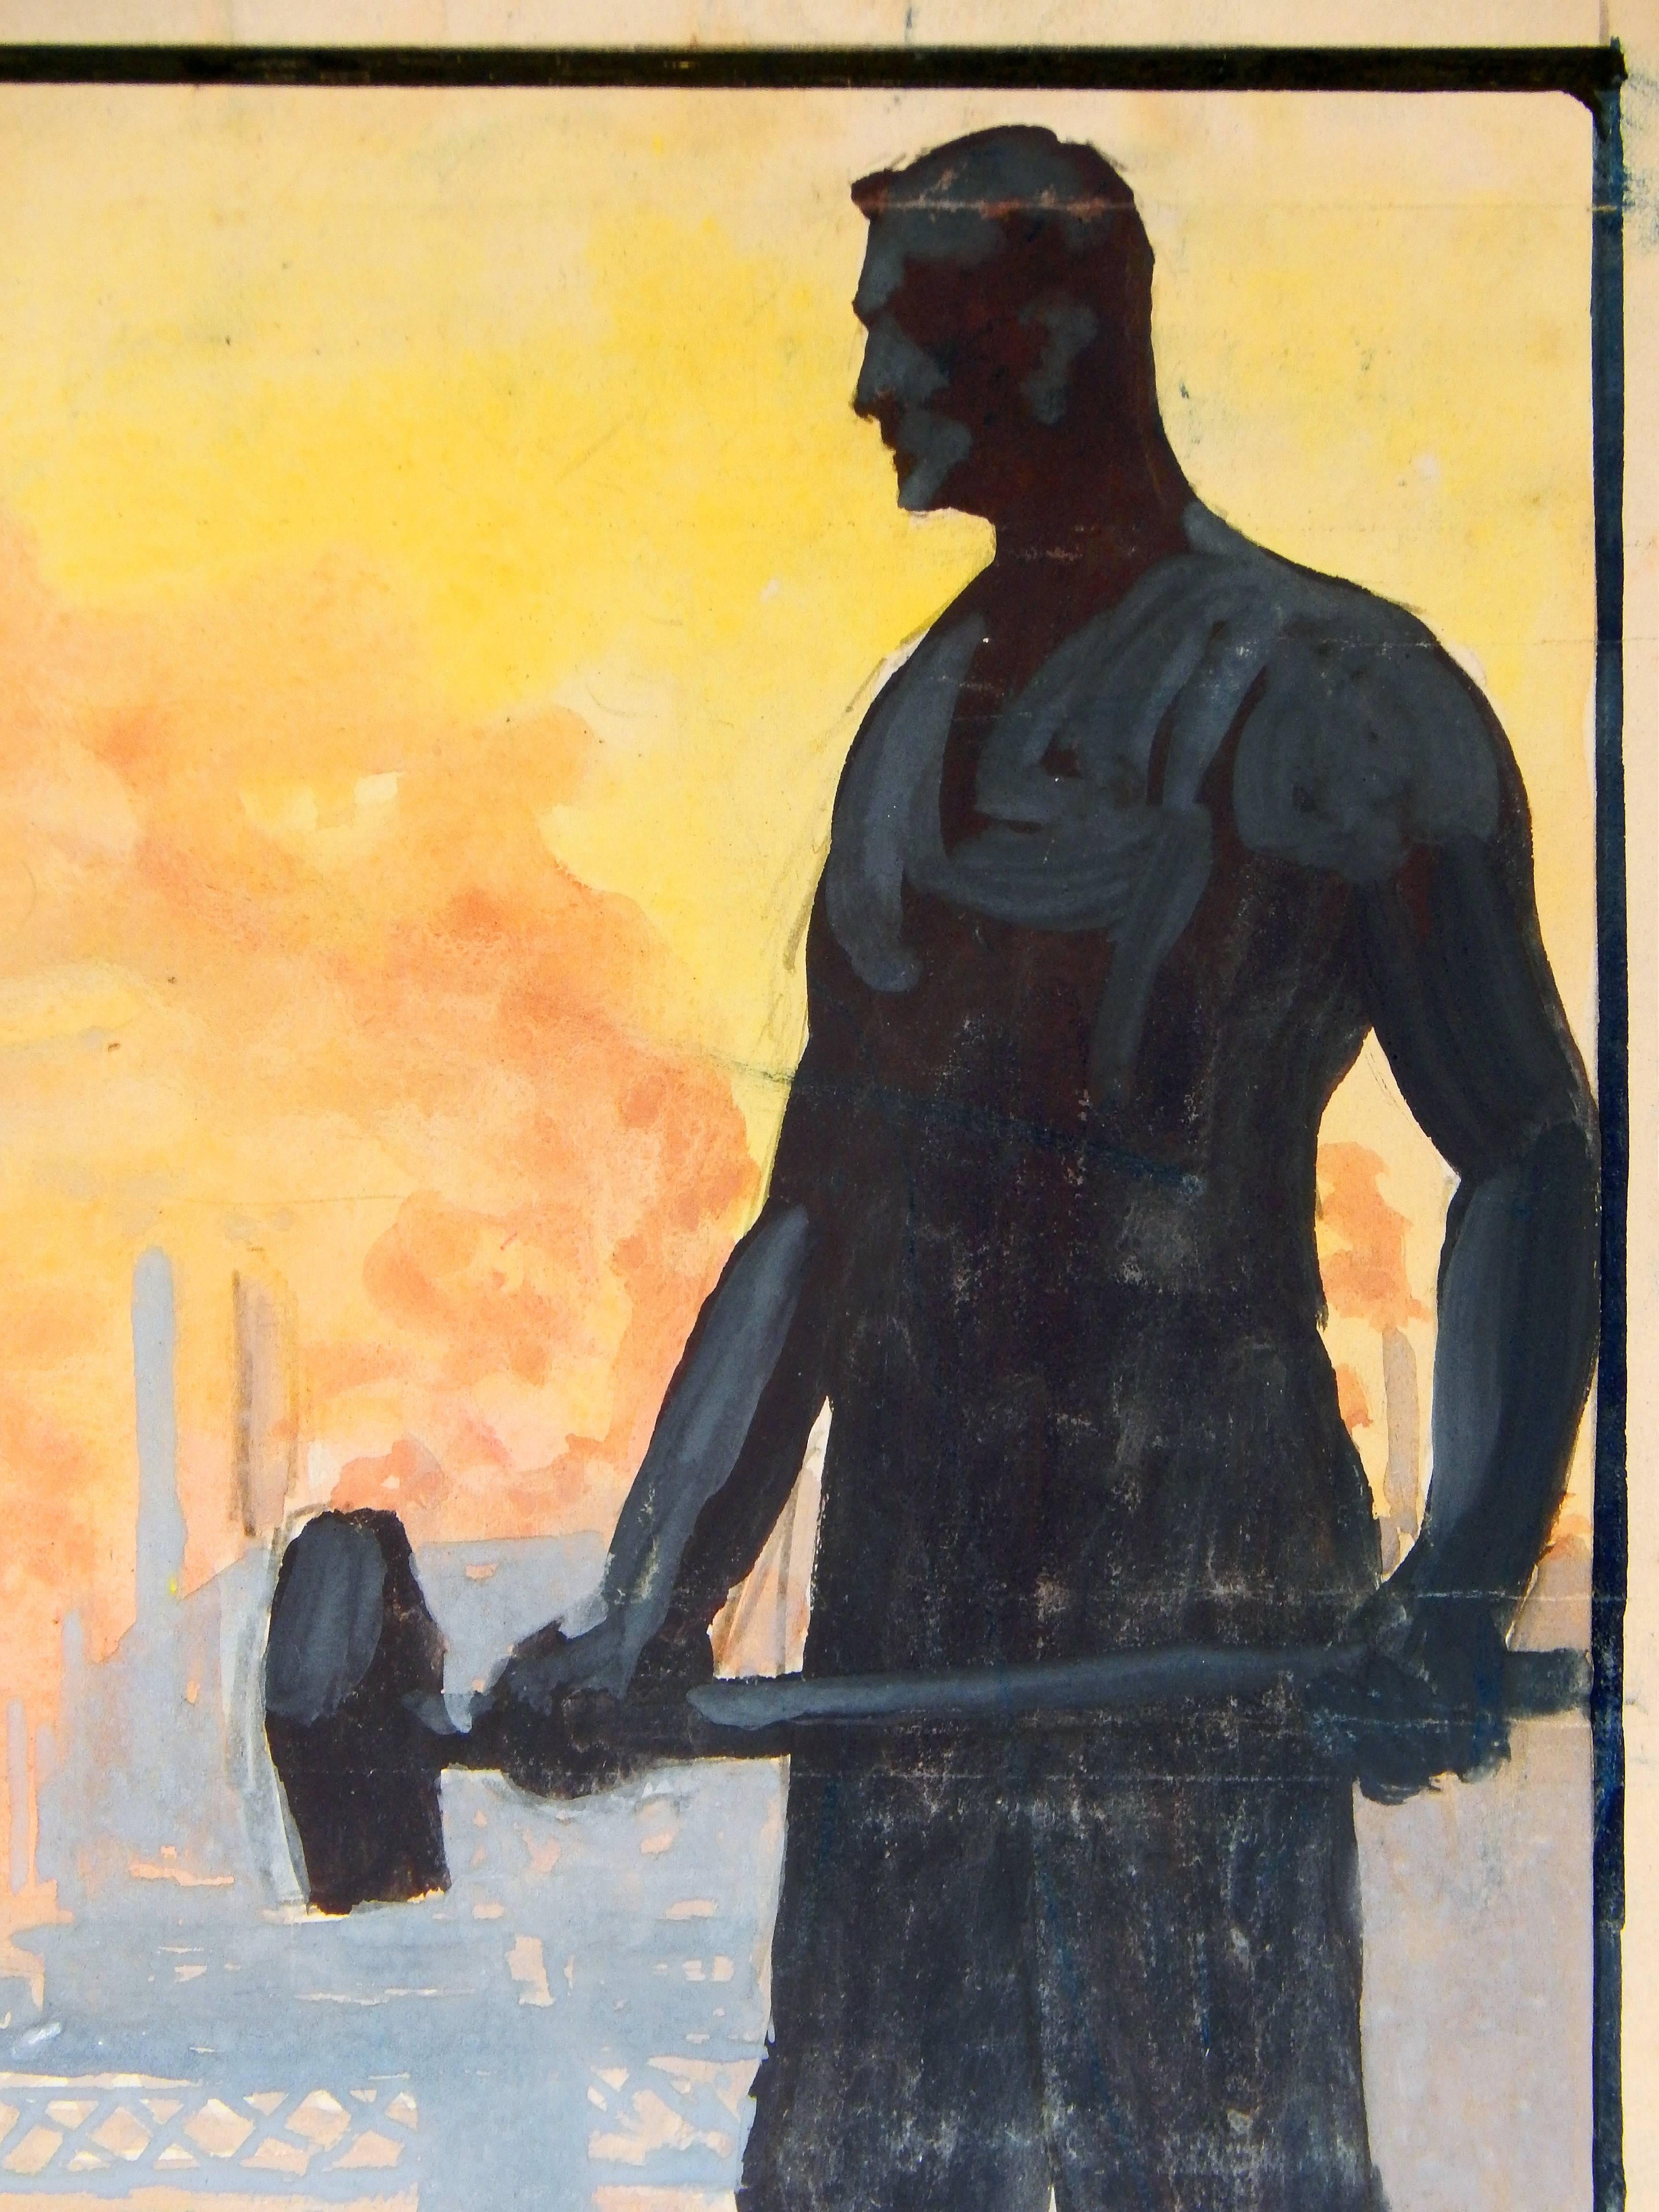 Brilliantly juxtaposing the silhouette of an factory worker, with his sledgehammer, against the backdrop of an industrial landscape in beautiful hues of purple, lemon yellow and tangerine, this painting was executed by Gerrit Beneker for the Newark